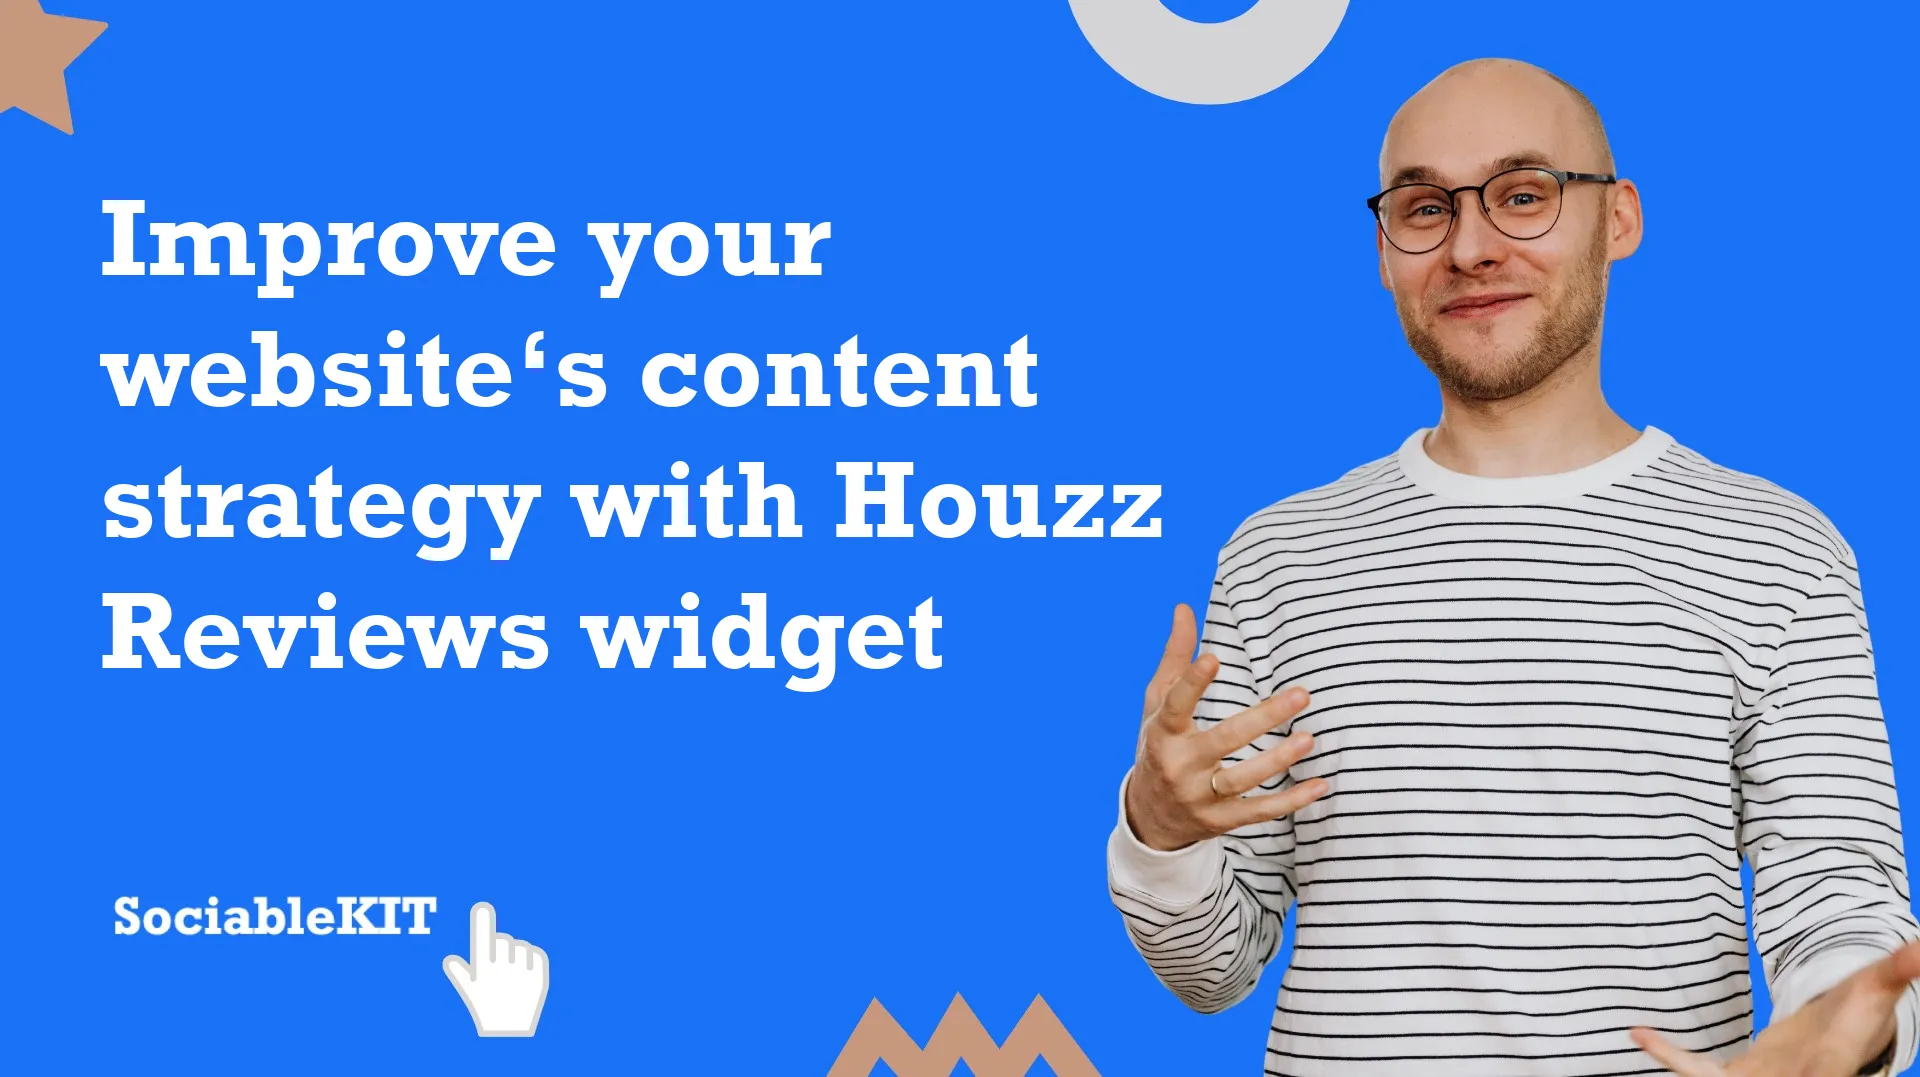 Improve your website’s content strategy with Houzz Reviews widget